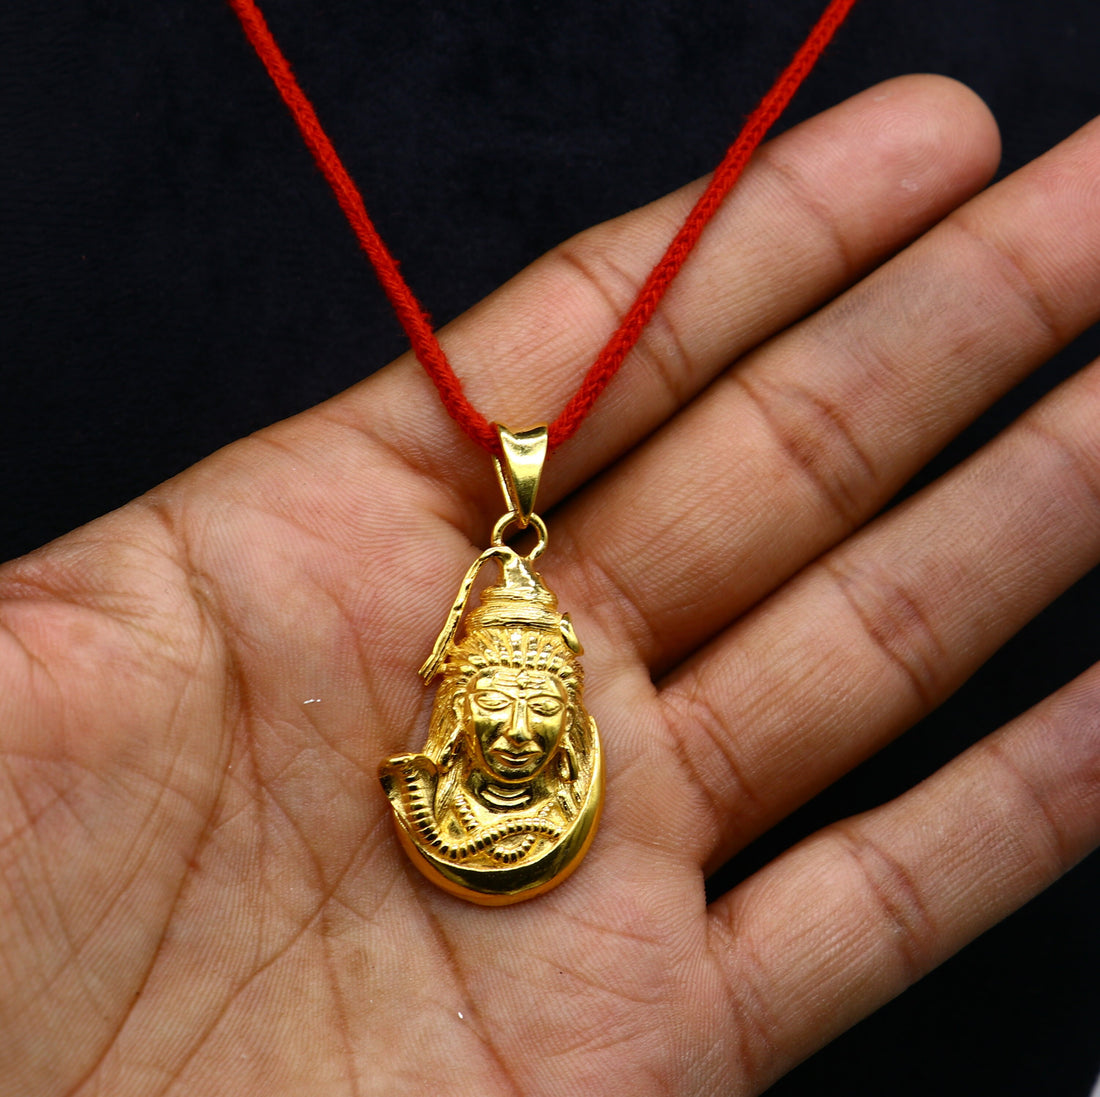 925 sterling silver Gold polished divine Hindu idol Lord Shiva pendant, excellent gifting unisex locket pendant customized jewelry nsp594 - TRIBAL ORNAMENTS